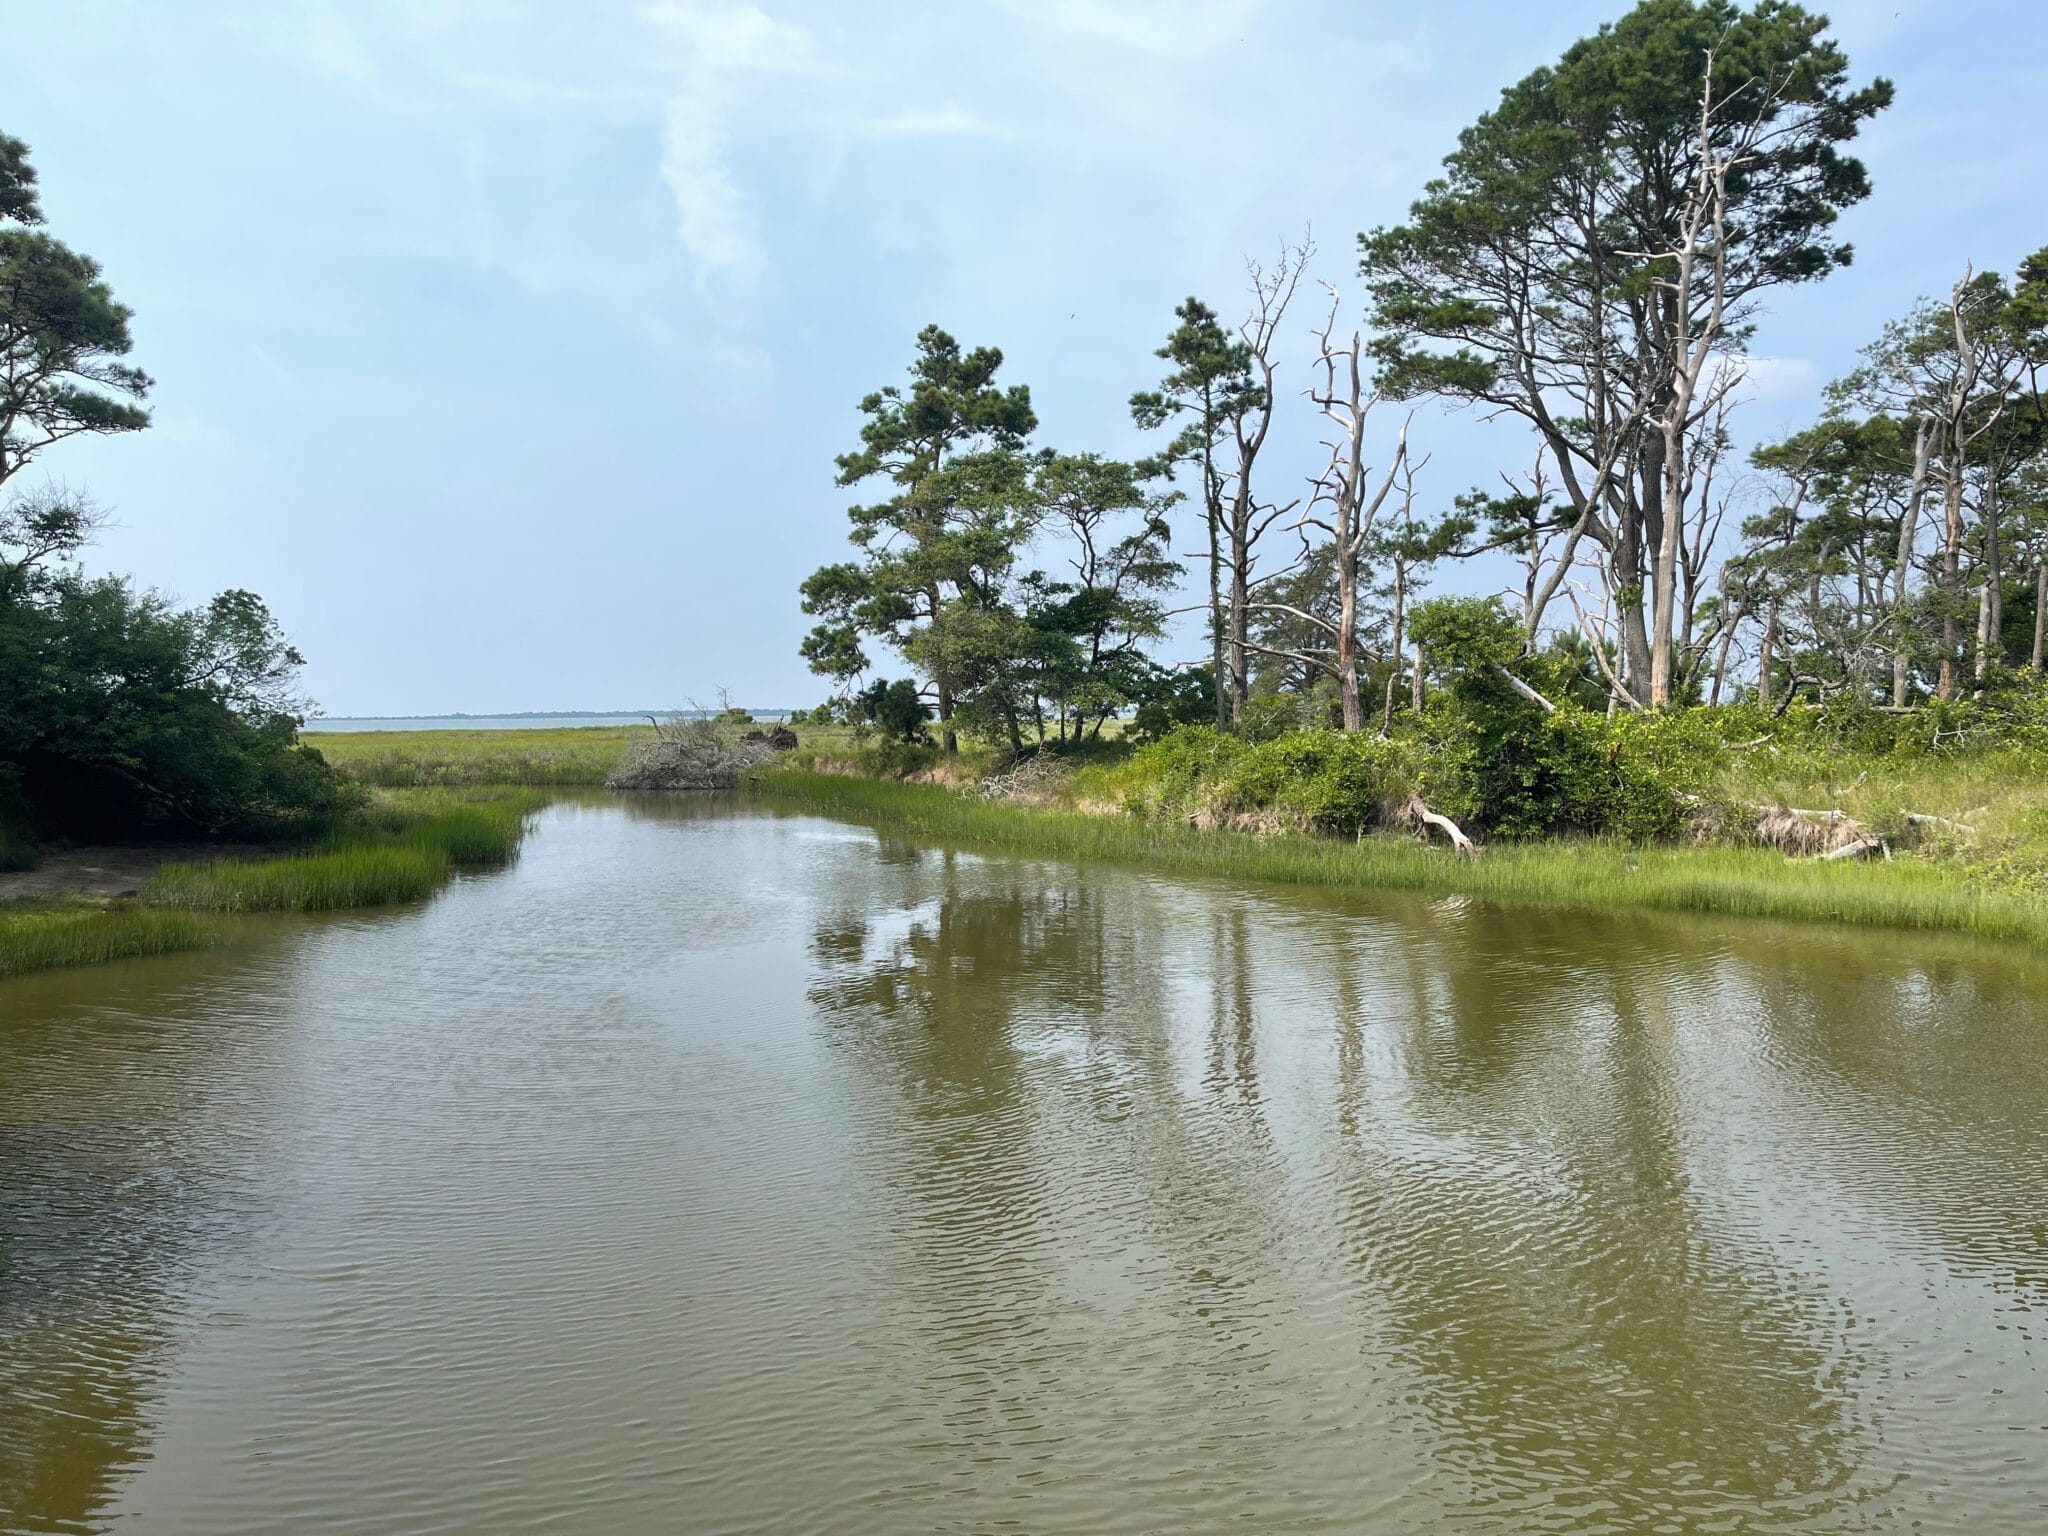 Inlet and pine forest in the Chincoteague National Wildlife Refuge